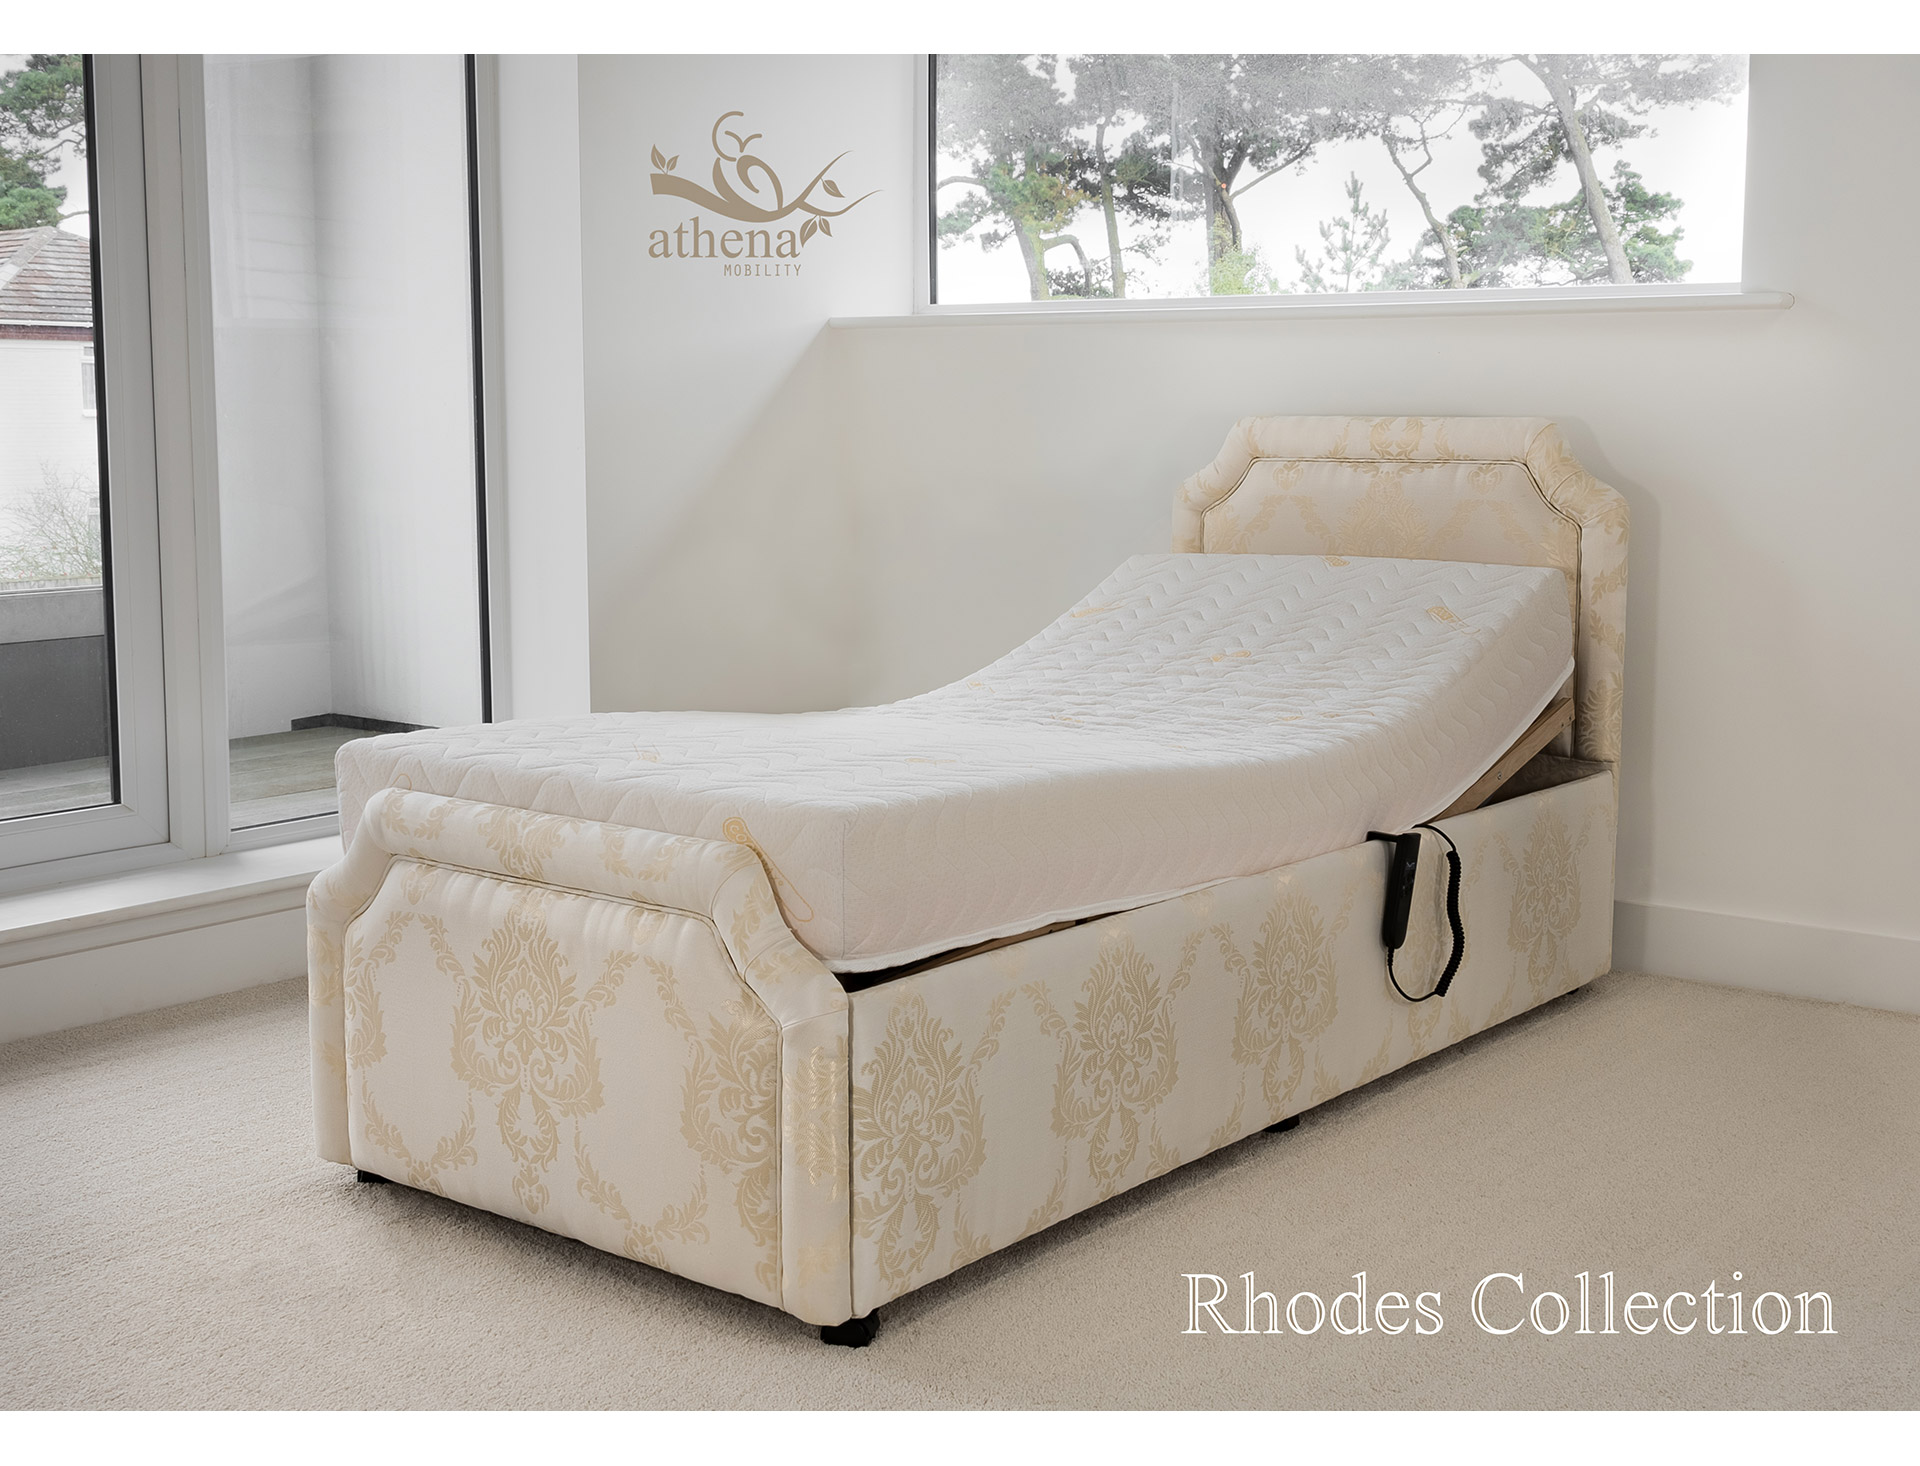 Athena Mobility | Rhodes Bed Collection